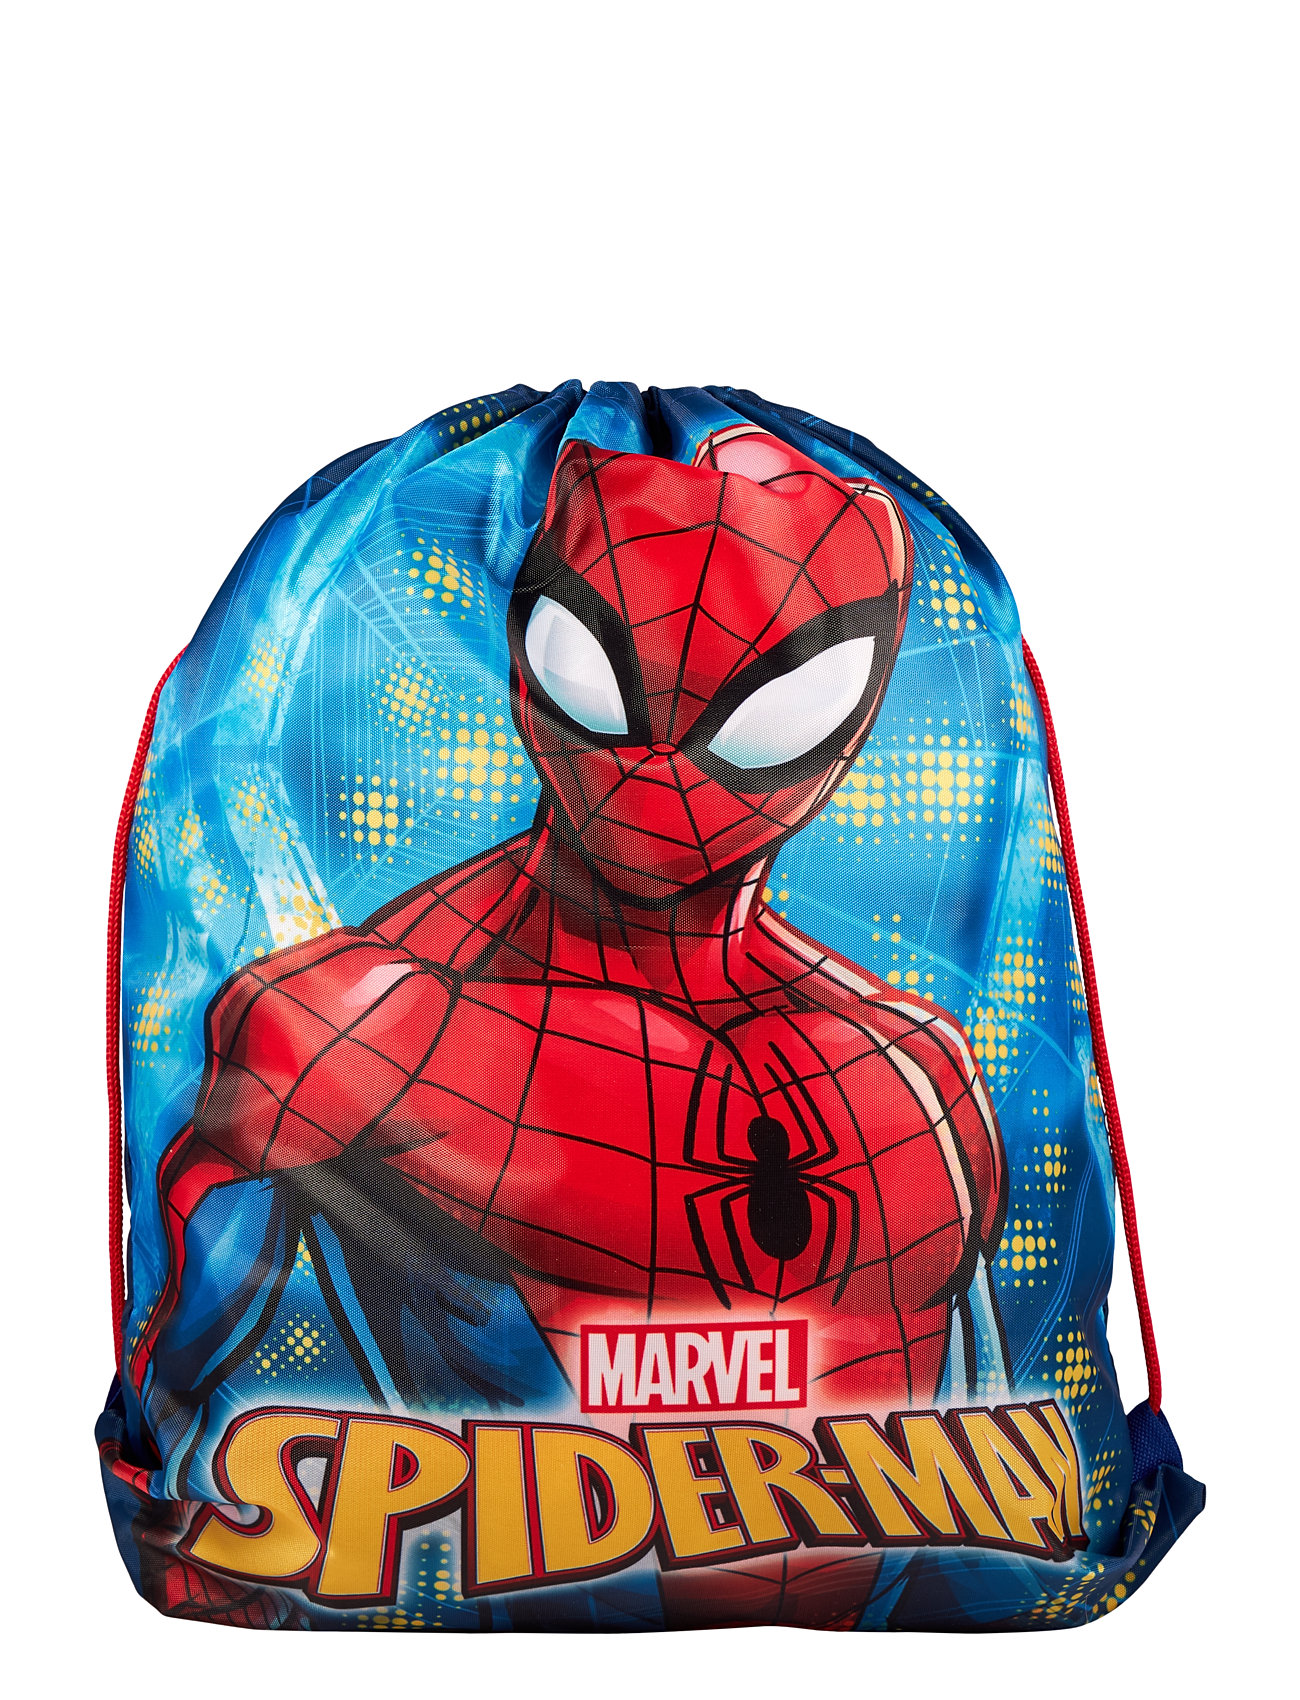 Spiderman, Drawstring Gym Bag Accessories Bags Sports Bags Multi/patterned Spider-man